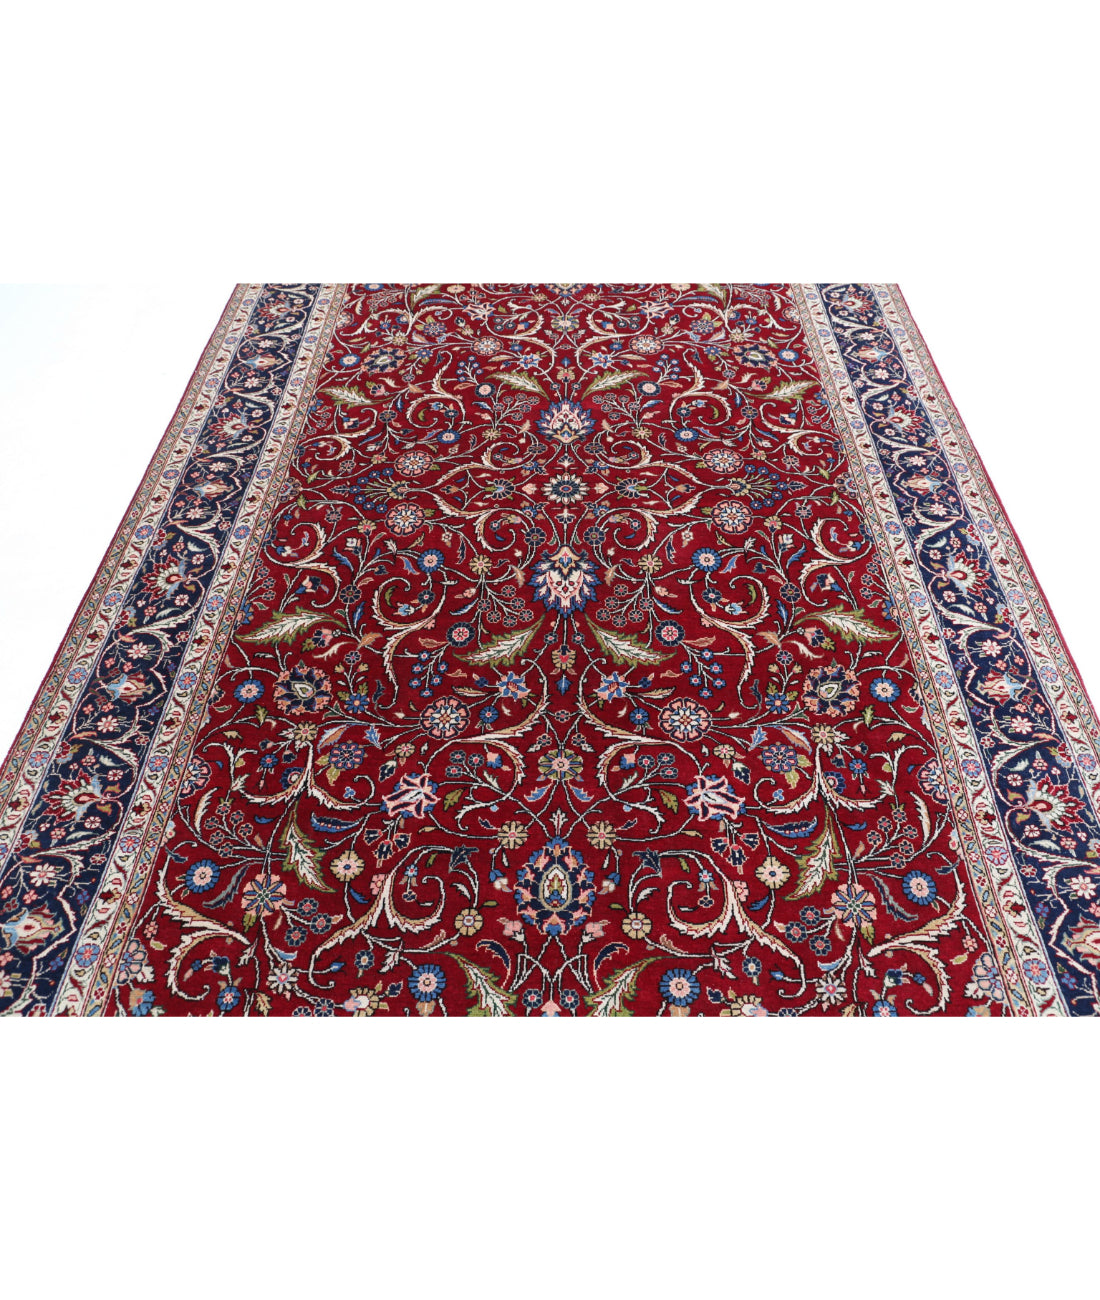 Persian Tabriz Wool Hand Knotted Rug - 6'7'' x 9'11'' -5013421-4